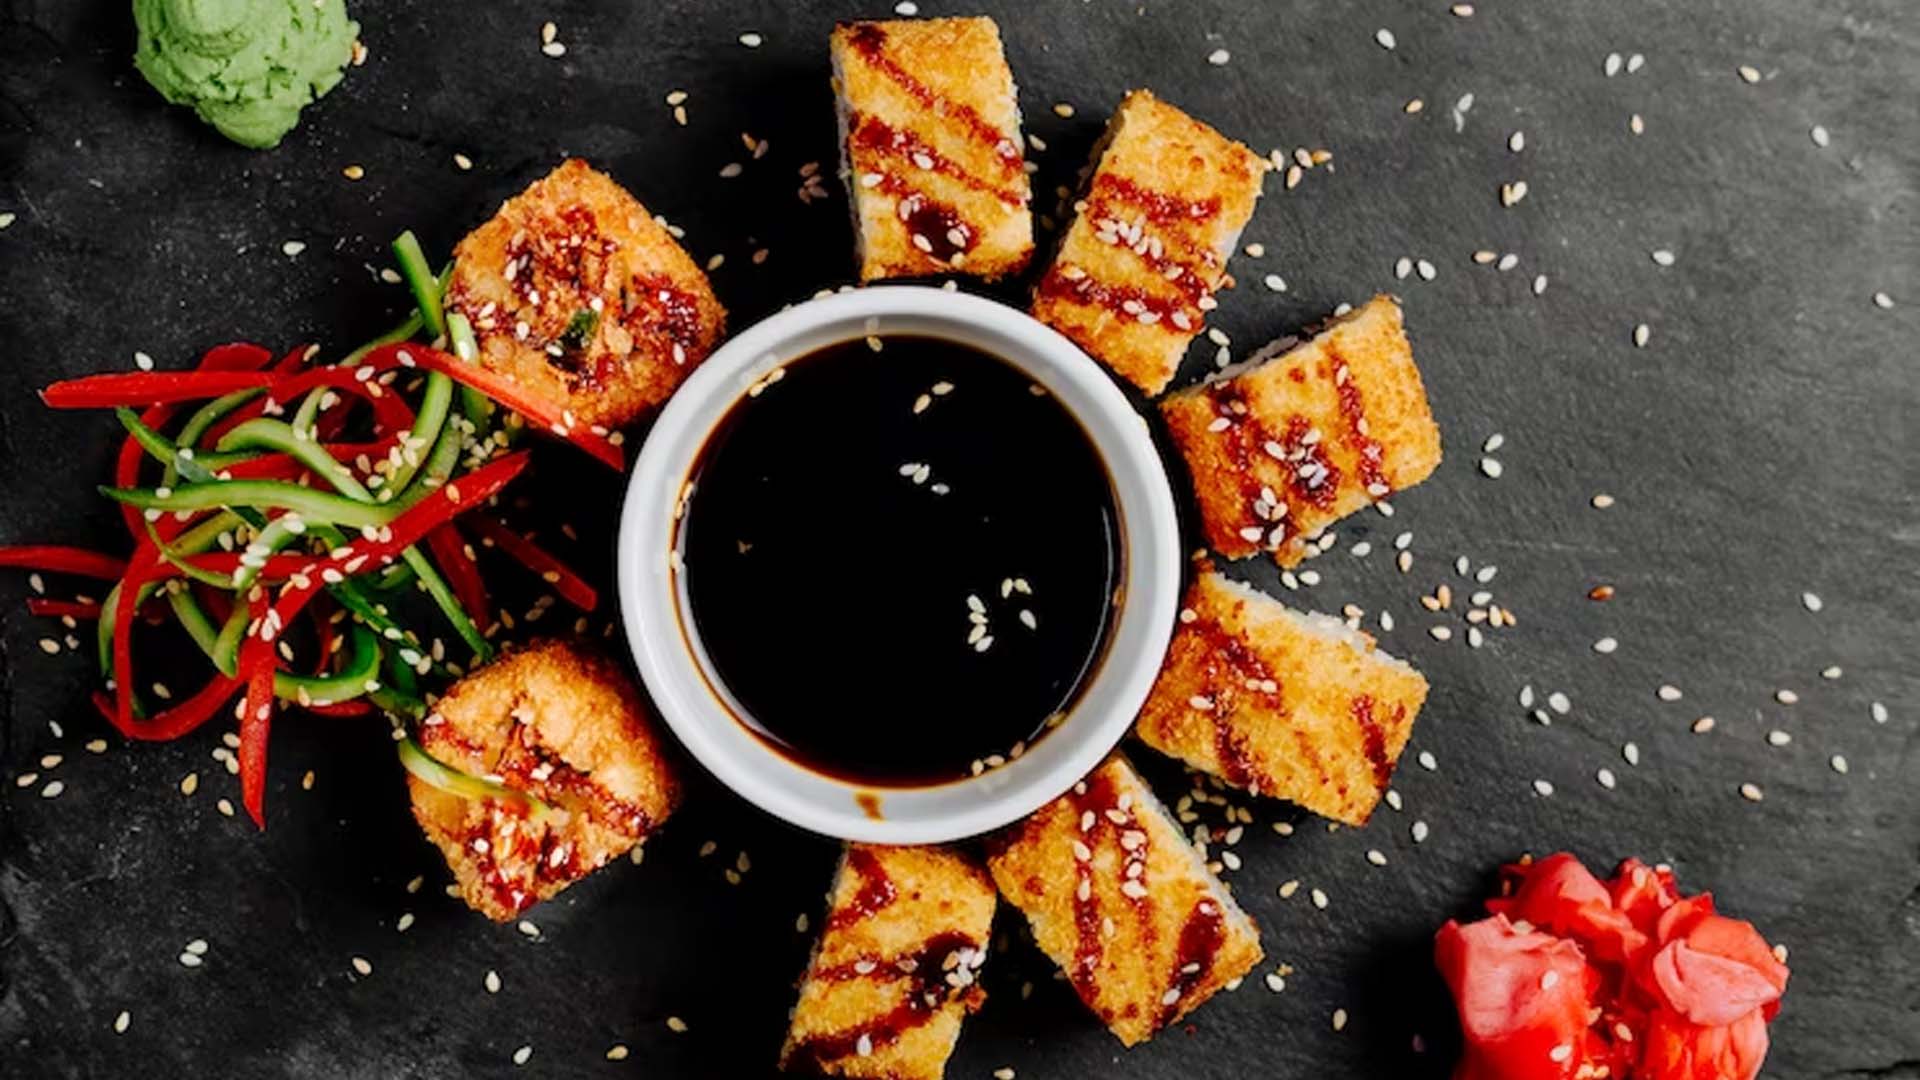 Is Soy Sauce Good For Health?